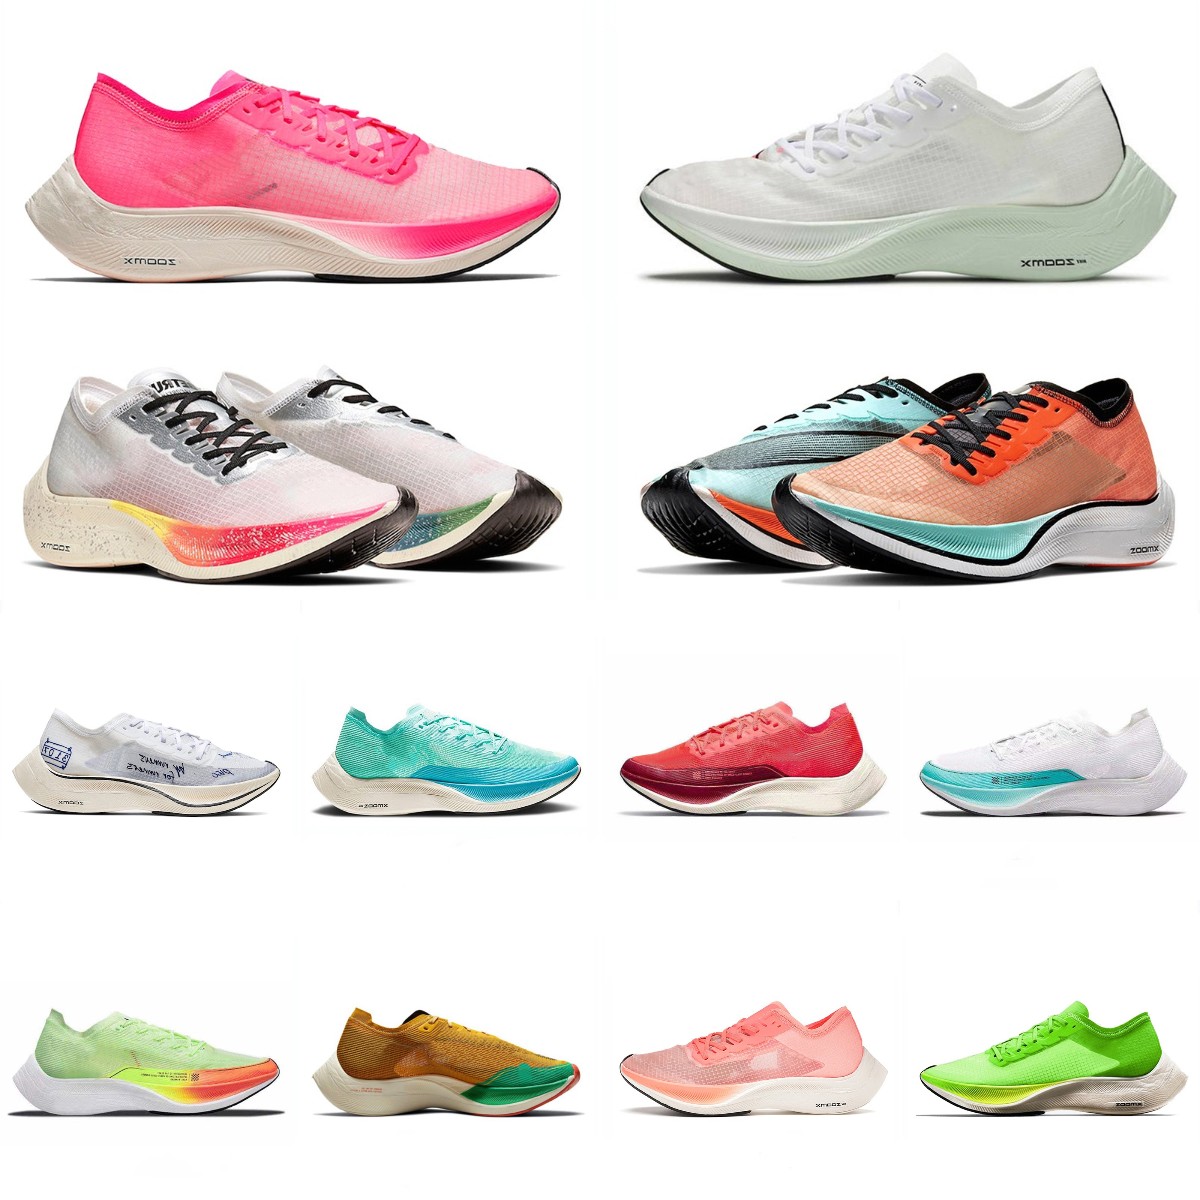 

New Zoomx Mens Running Shoes Grey Blue Black White Rose Pink Volt Orange Hyper Turquoise Aurora Green Men Women Sports Sneakers Trainers Eur 36-45, Box